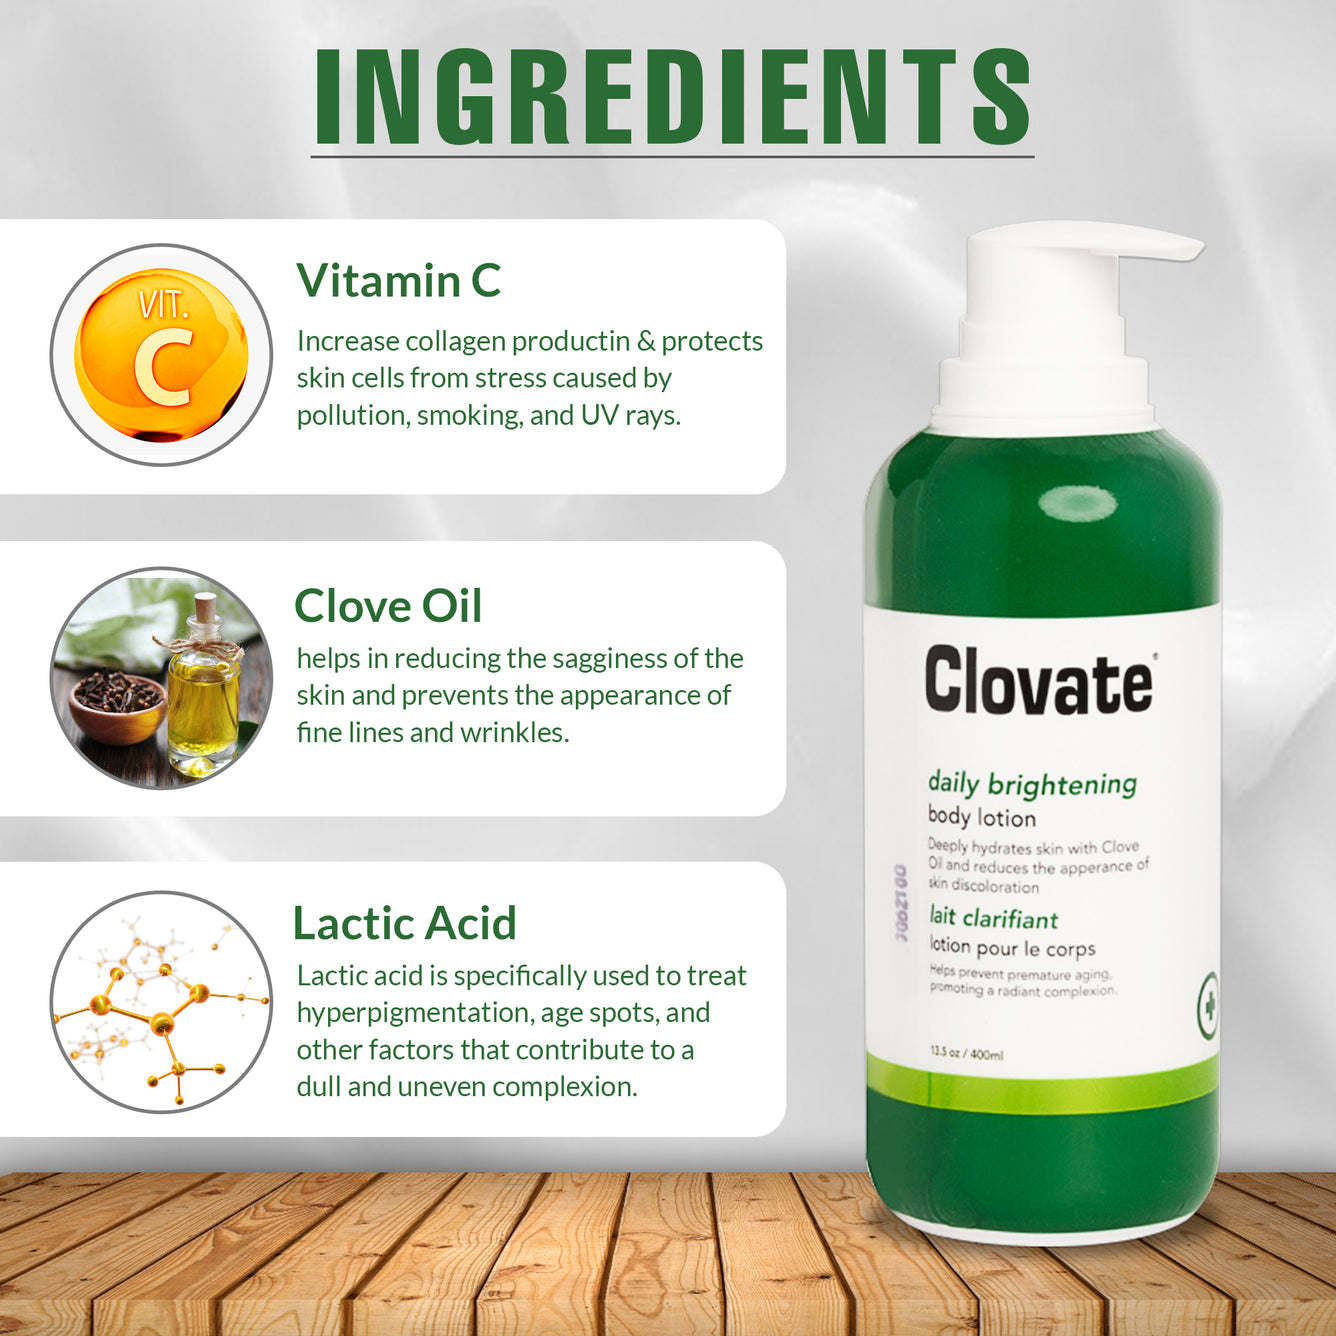 Clovate Intense Body Lotion (with Airless pump) 400ML..